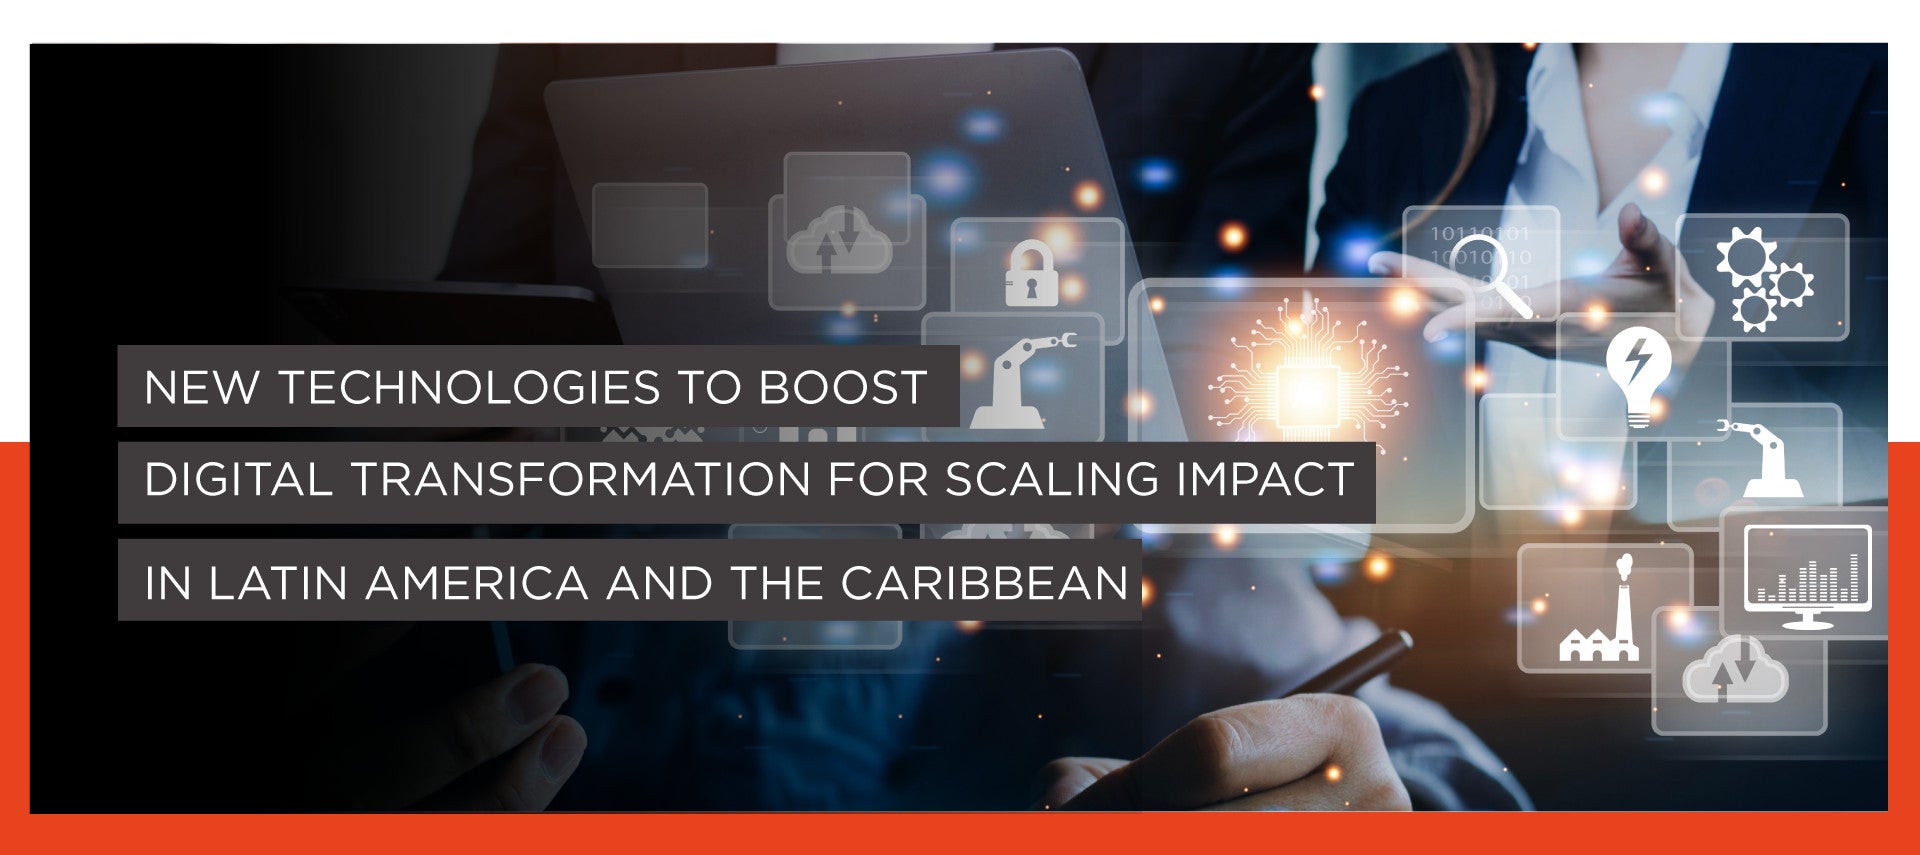 New Technologies to Boost Digital Transformation for Scaling Impact in Latin America and the Caribbean